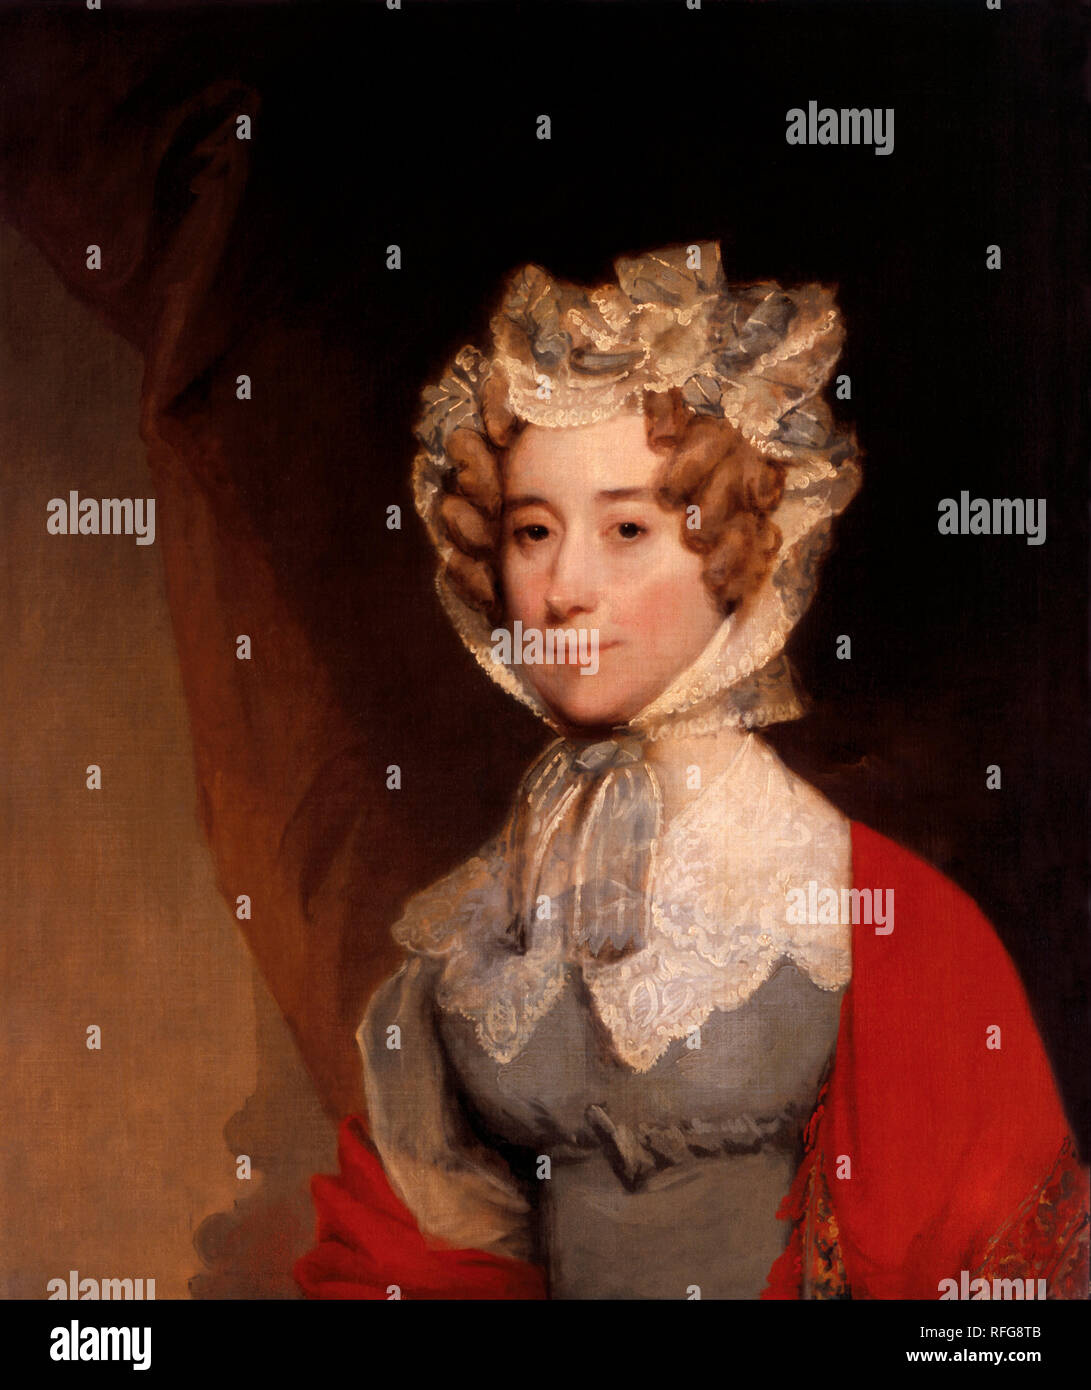 Louisa Catherine Johnson Adams (Mrs. John Quincy Adams). Date/Period: 1821 - 1826. Painting. Oil on canvas Oil on canvas. Height: 763.52 mm (30.06 in); Width: 635 mm (25 in). Author: GILBERT STUART. Stock Photo